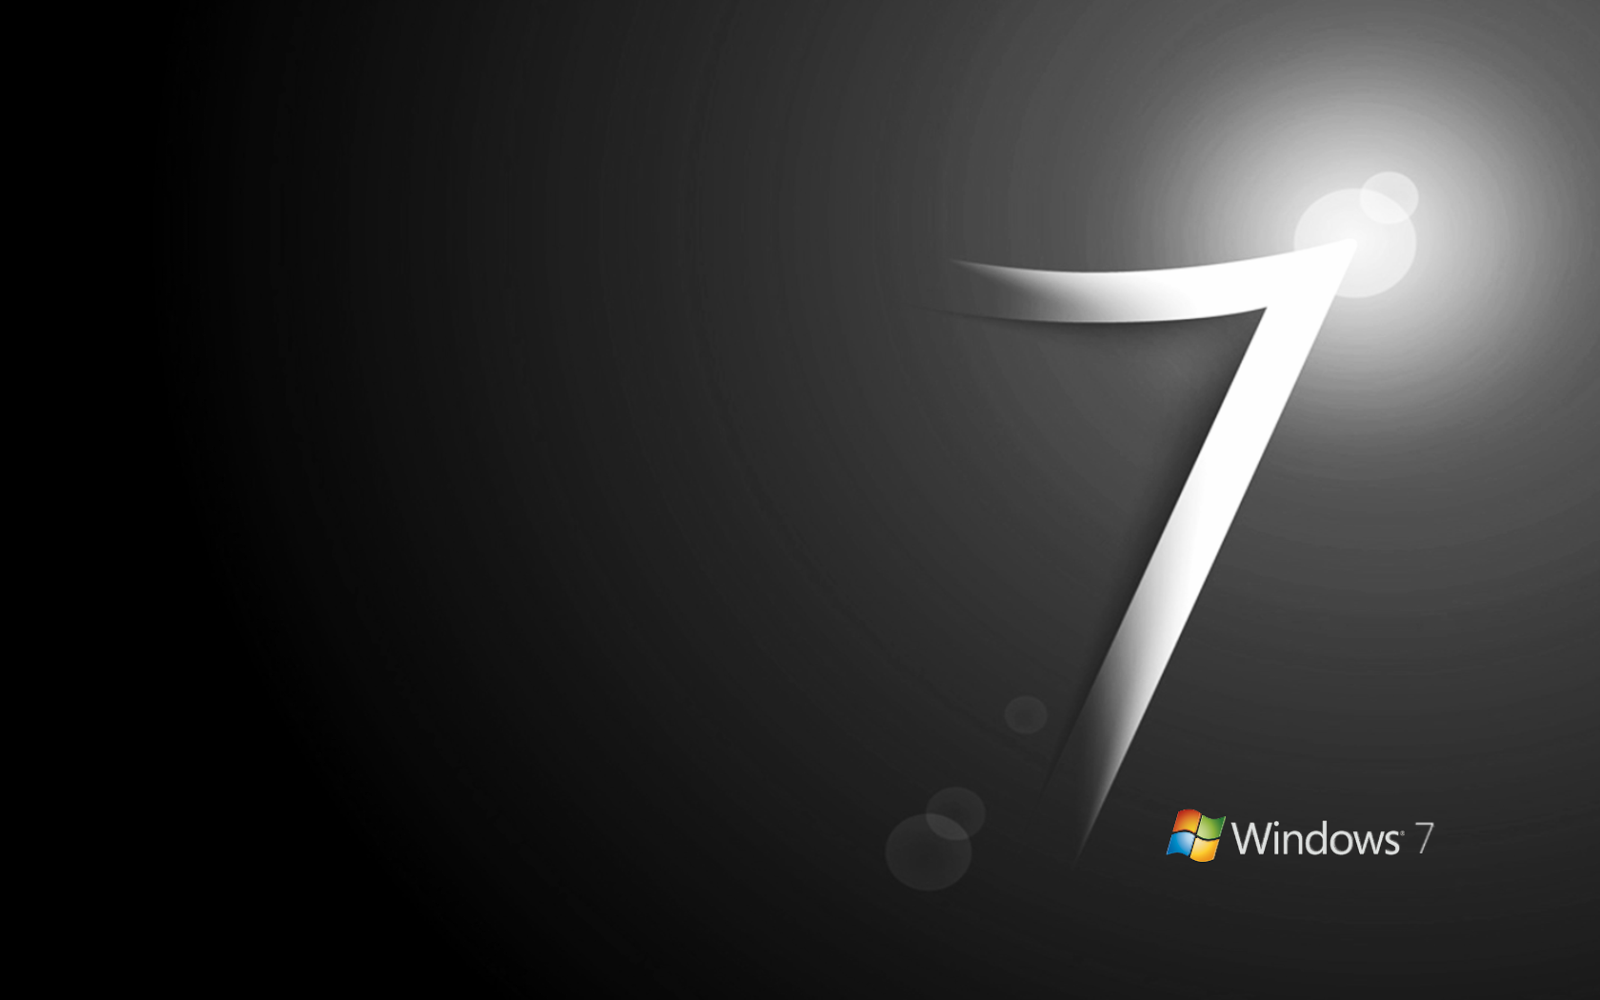 Windows 7 ultimate wallpapers free download